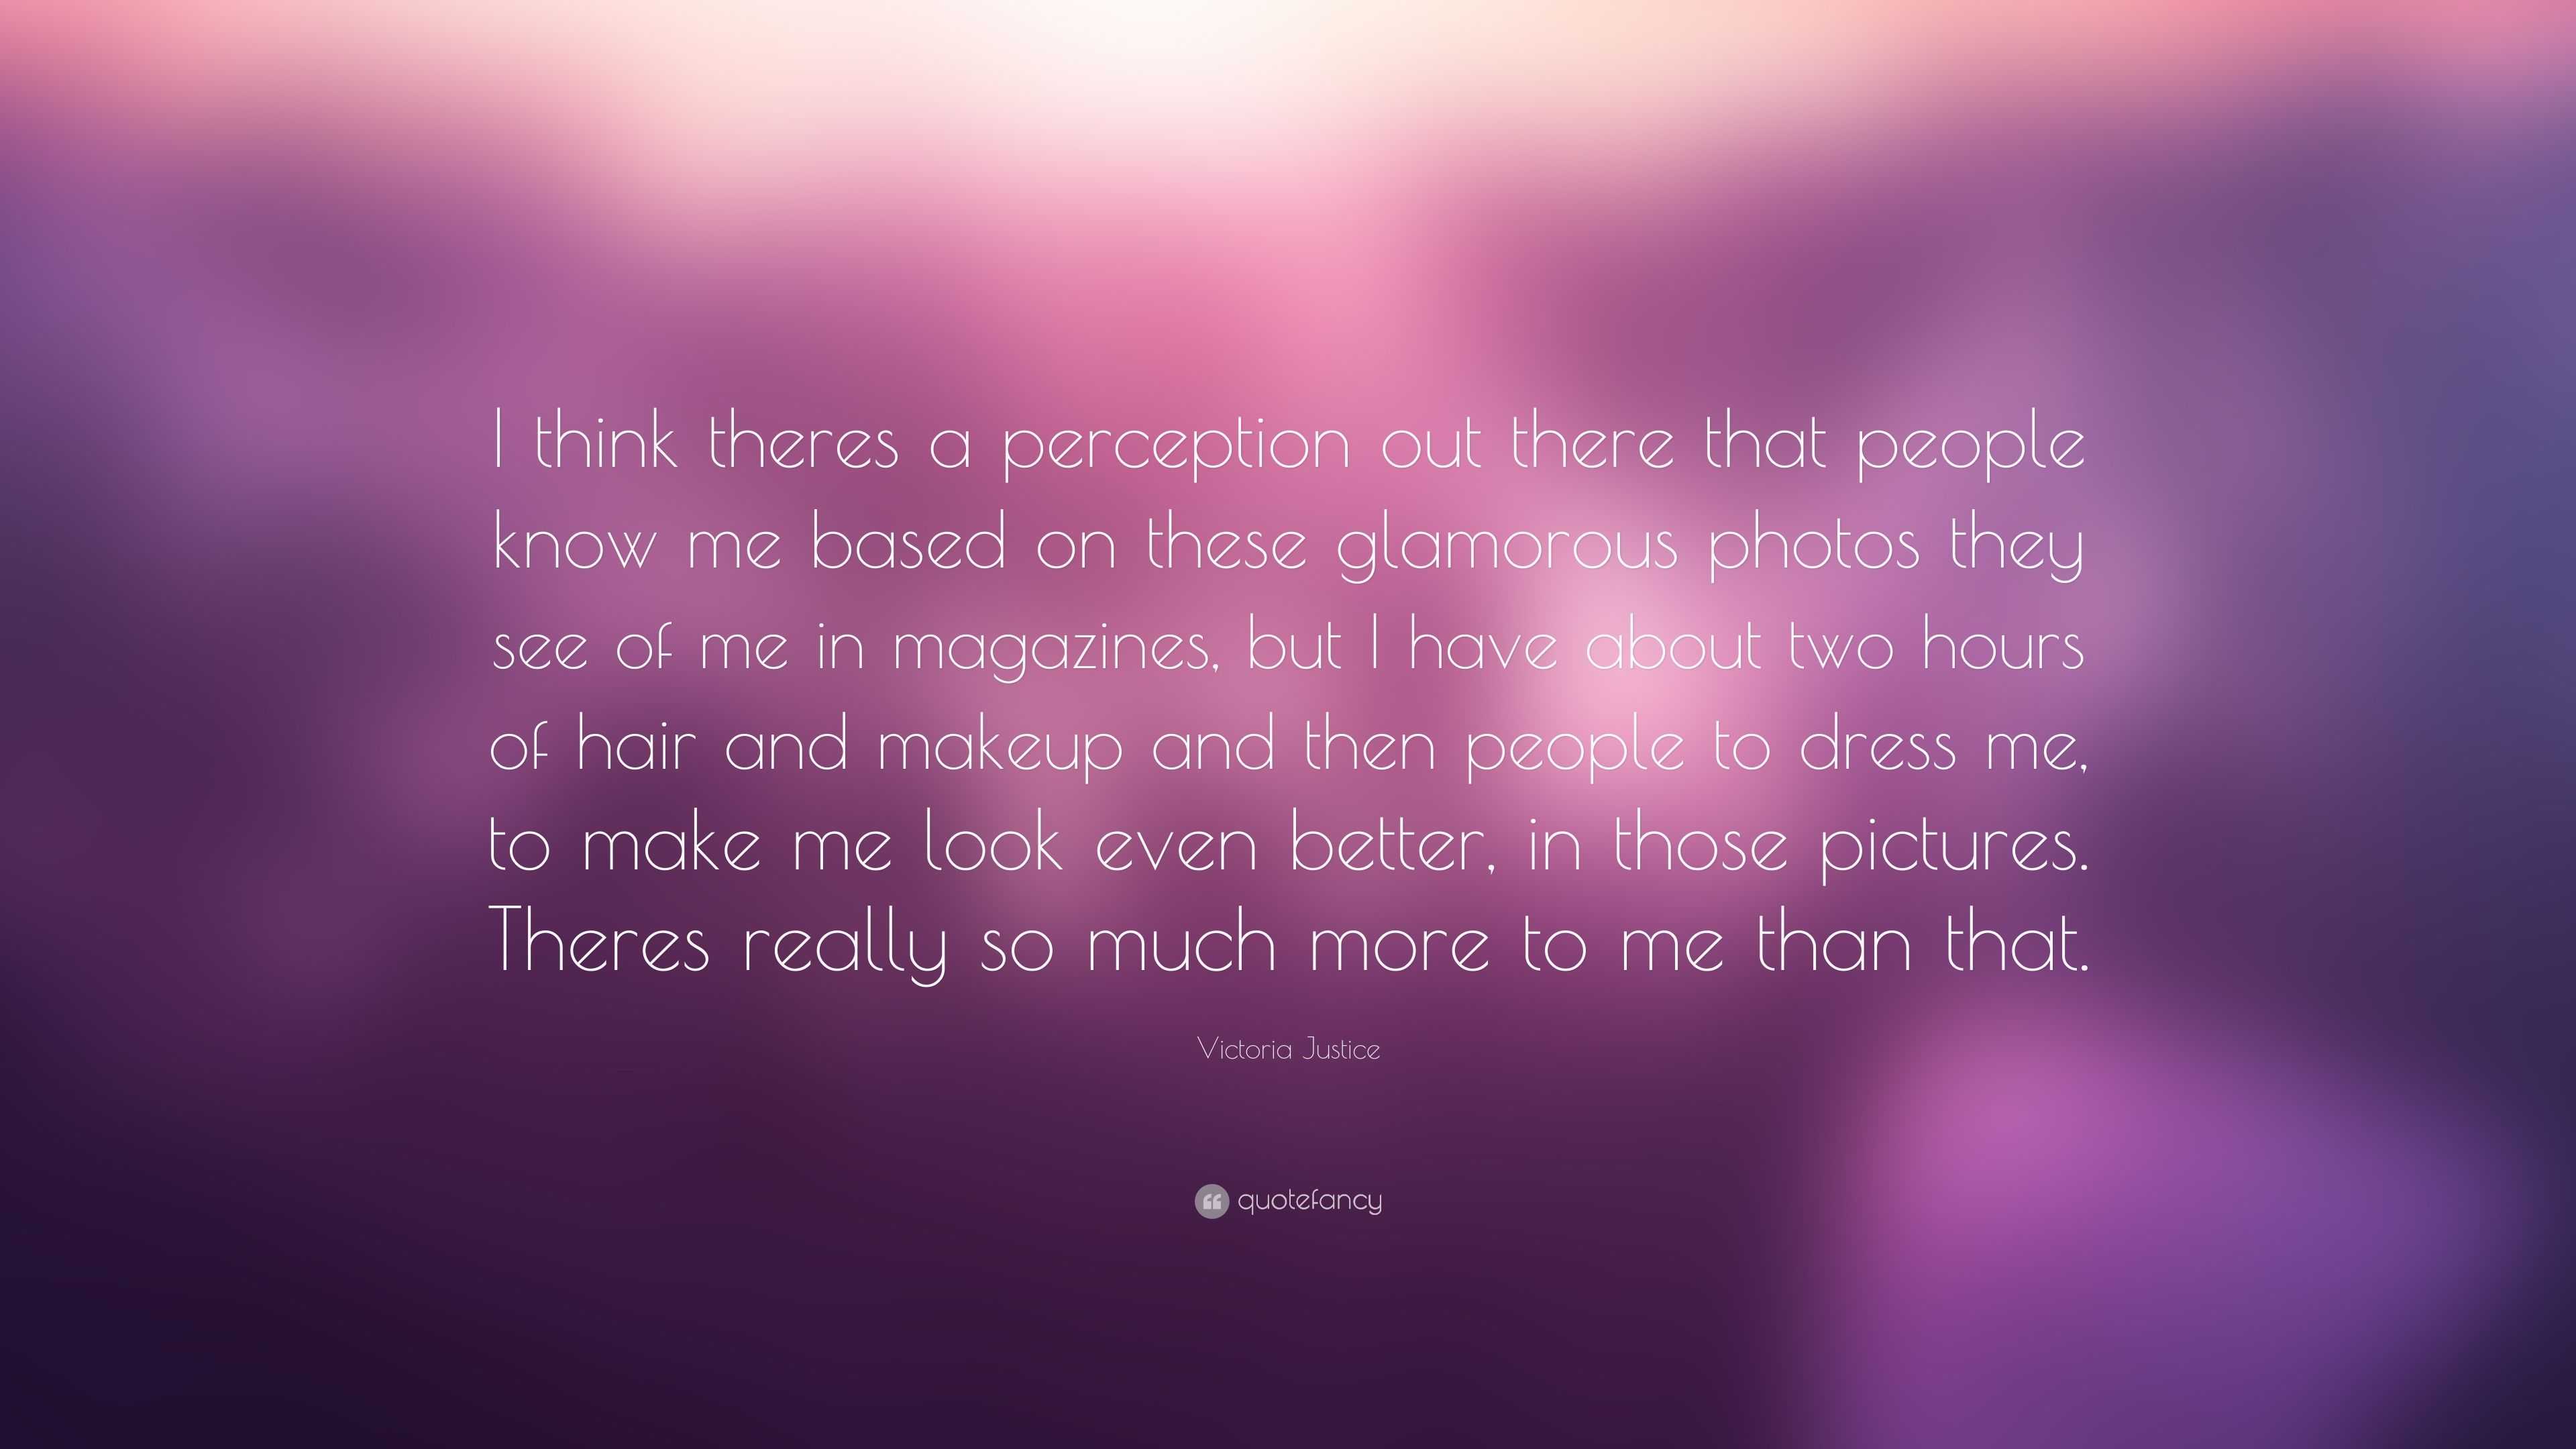 Victoria Justice Quote: “I think theres a perception out there that ...